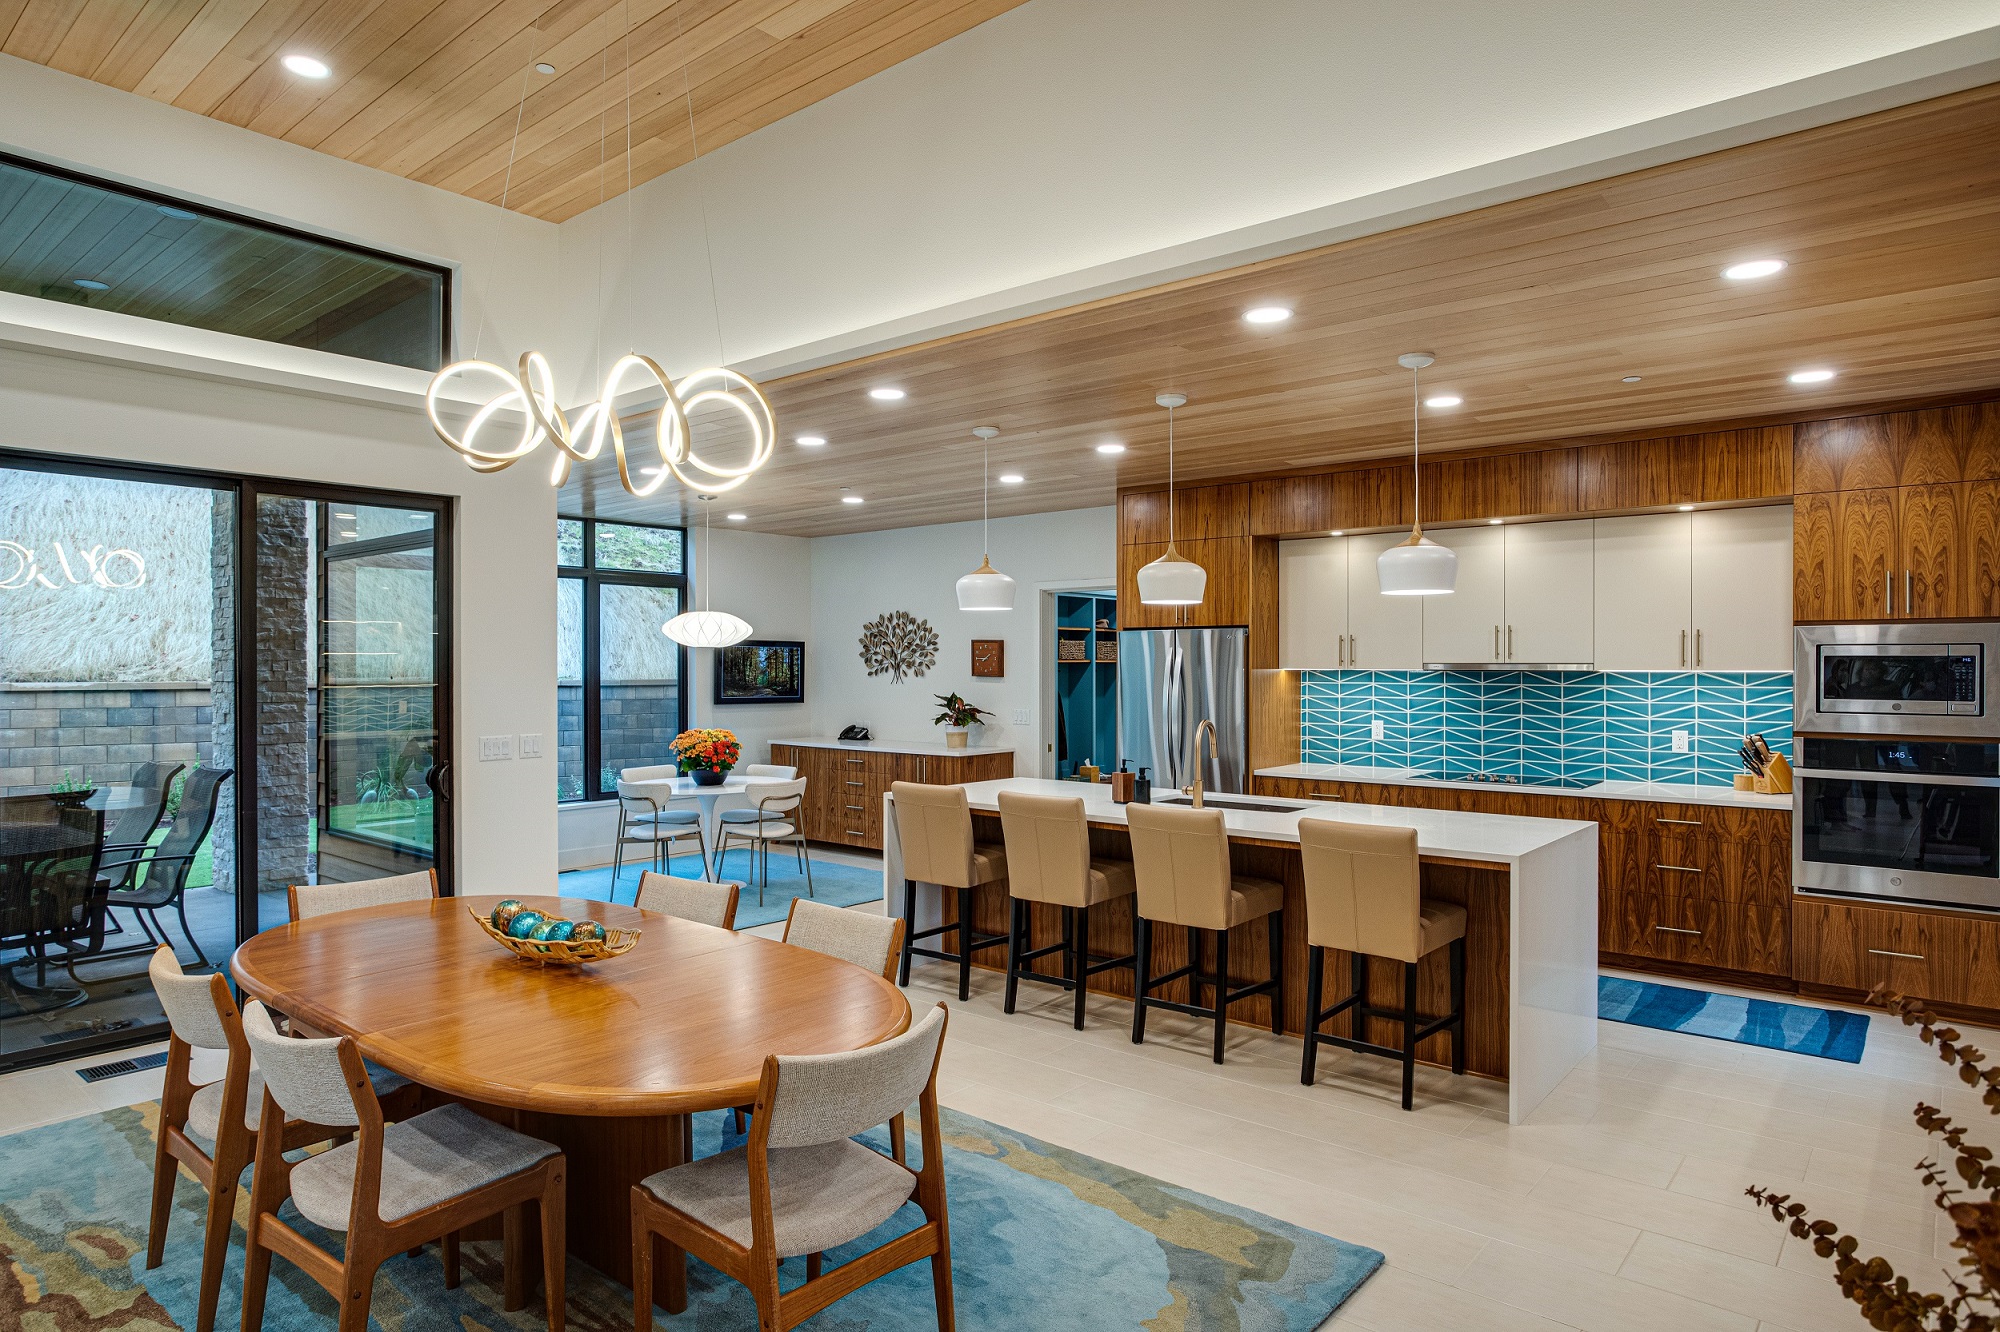 Open concept mid century modern dining room to kitchen with outdoor sight-lines